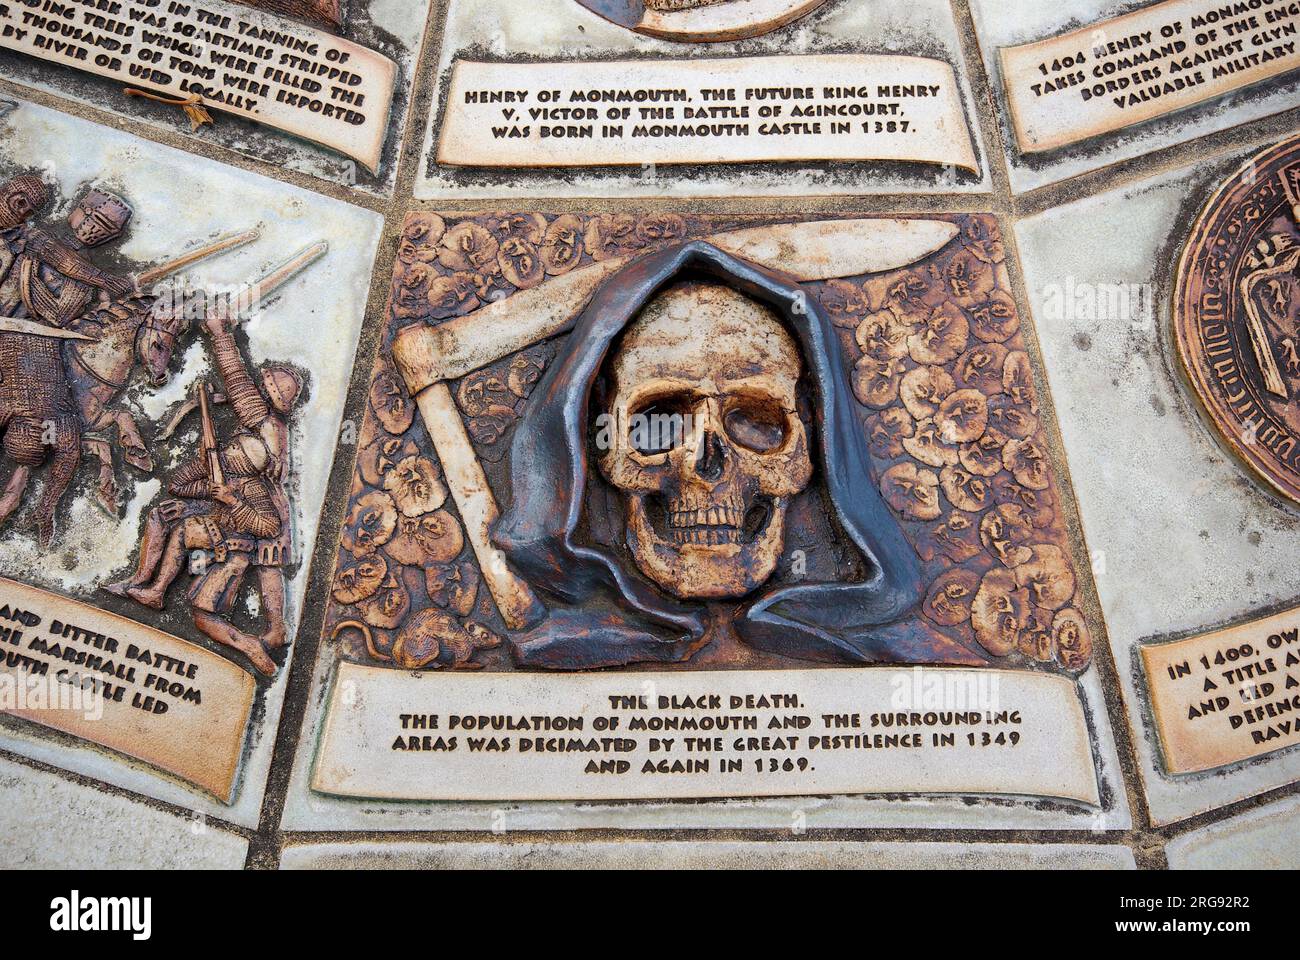 A Death's Head design on the Table Top Plaque, which depicts the history of Monmouth, Gwent, in several scenes.  This particular design commemorates the Black Death, which decimated the population of Monmouth and the surrounding area in 1349 and 1369. Stock Photo